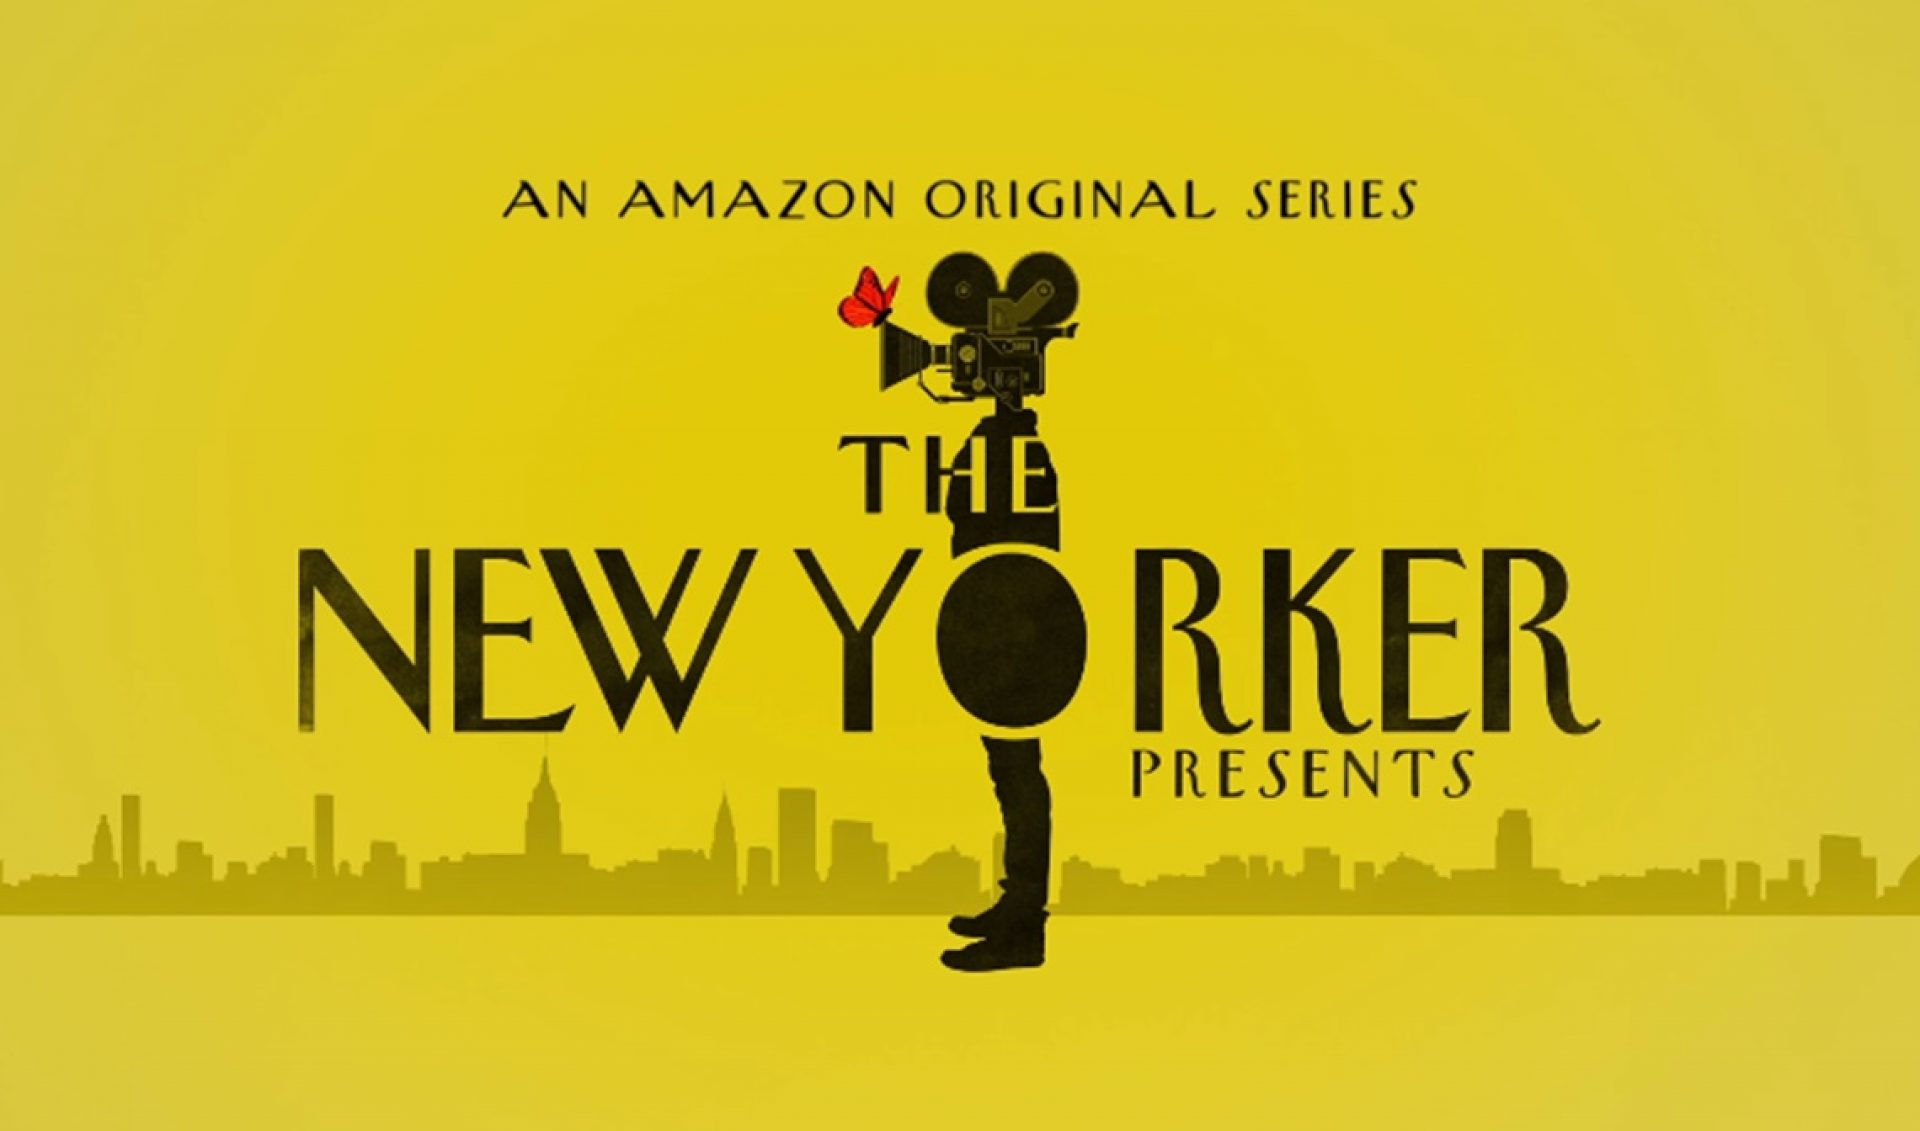 Amazon’s ‘The New Yorker Presents’ To Premiere On February 16th